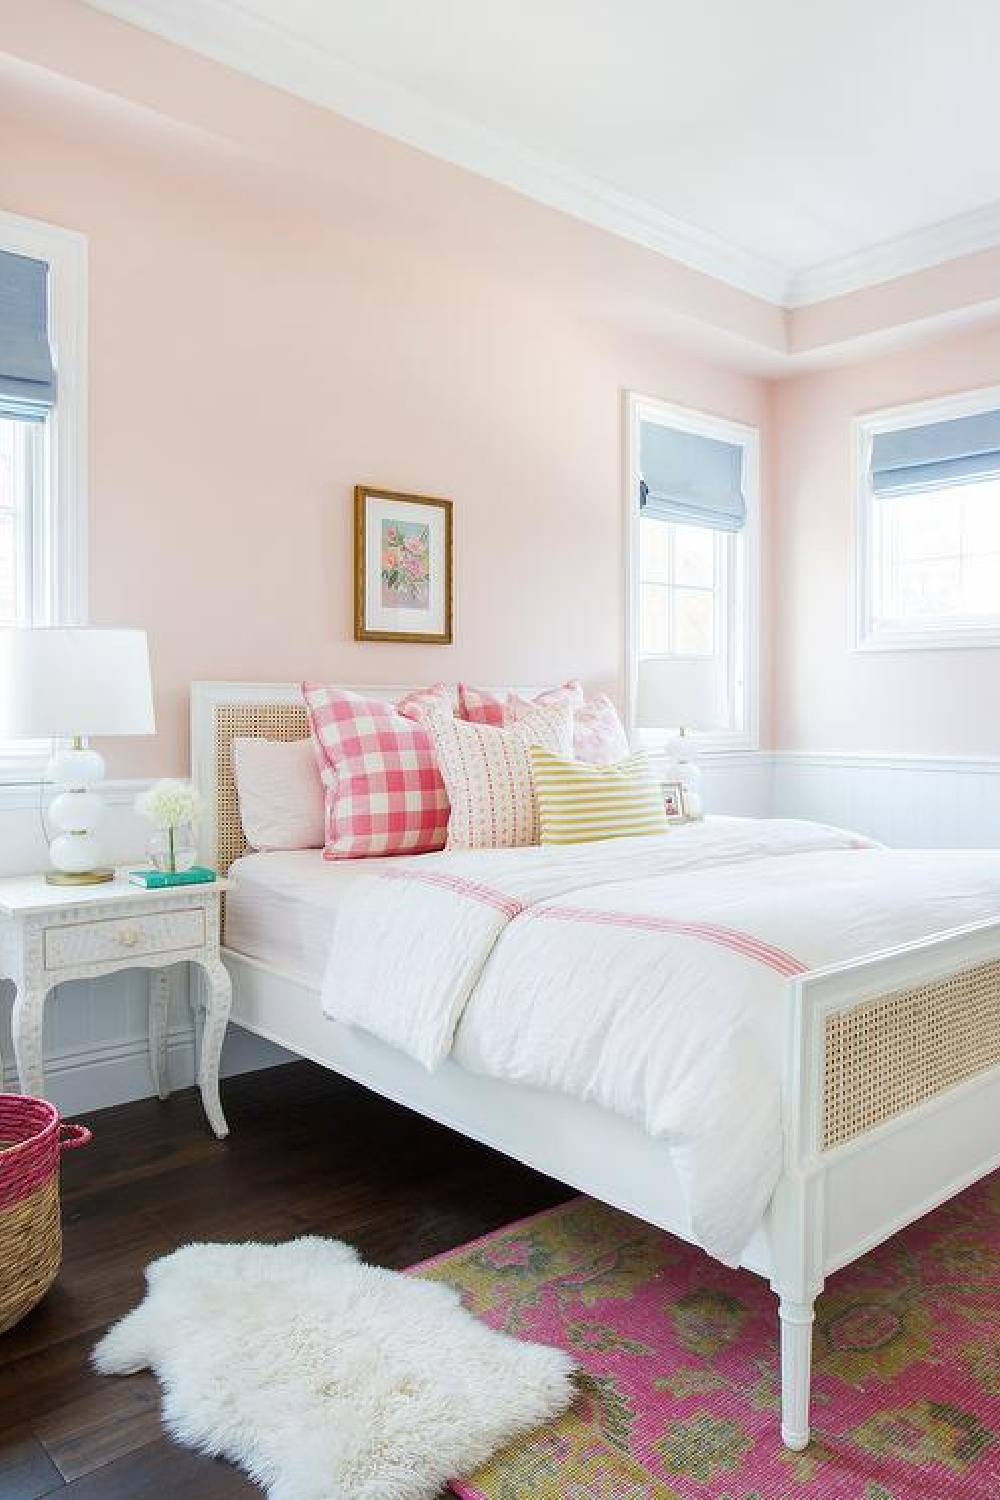 Pink Girl Bedroom with Love & Happiness pink walls by Benjamin Moore. Come see the Best Sophisticated, Chic and Subtle Pink Paint Colors on Hello Lovely Studio!